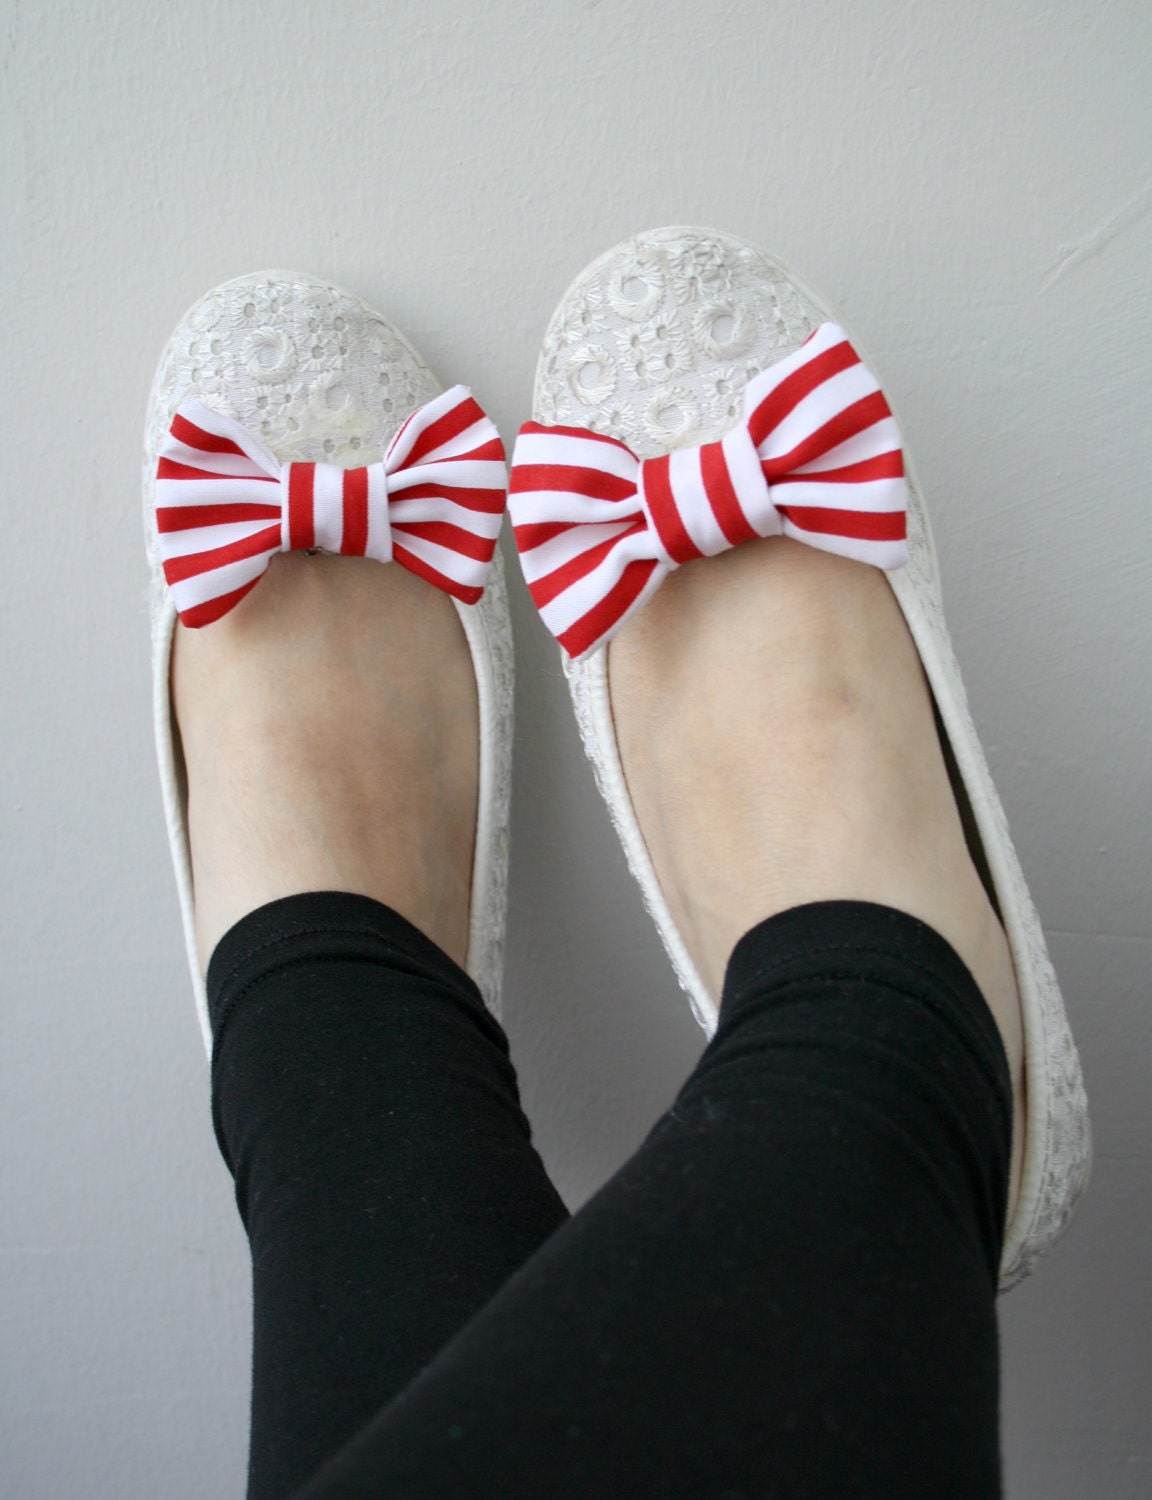 Red and White Striped Cotton Bow Shoe Clips  2 PCS